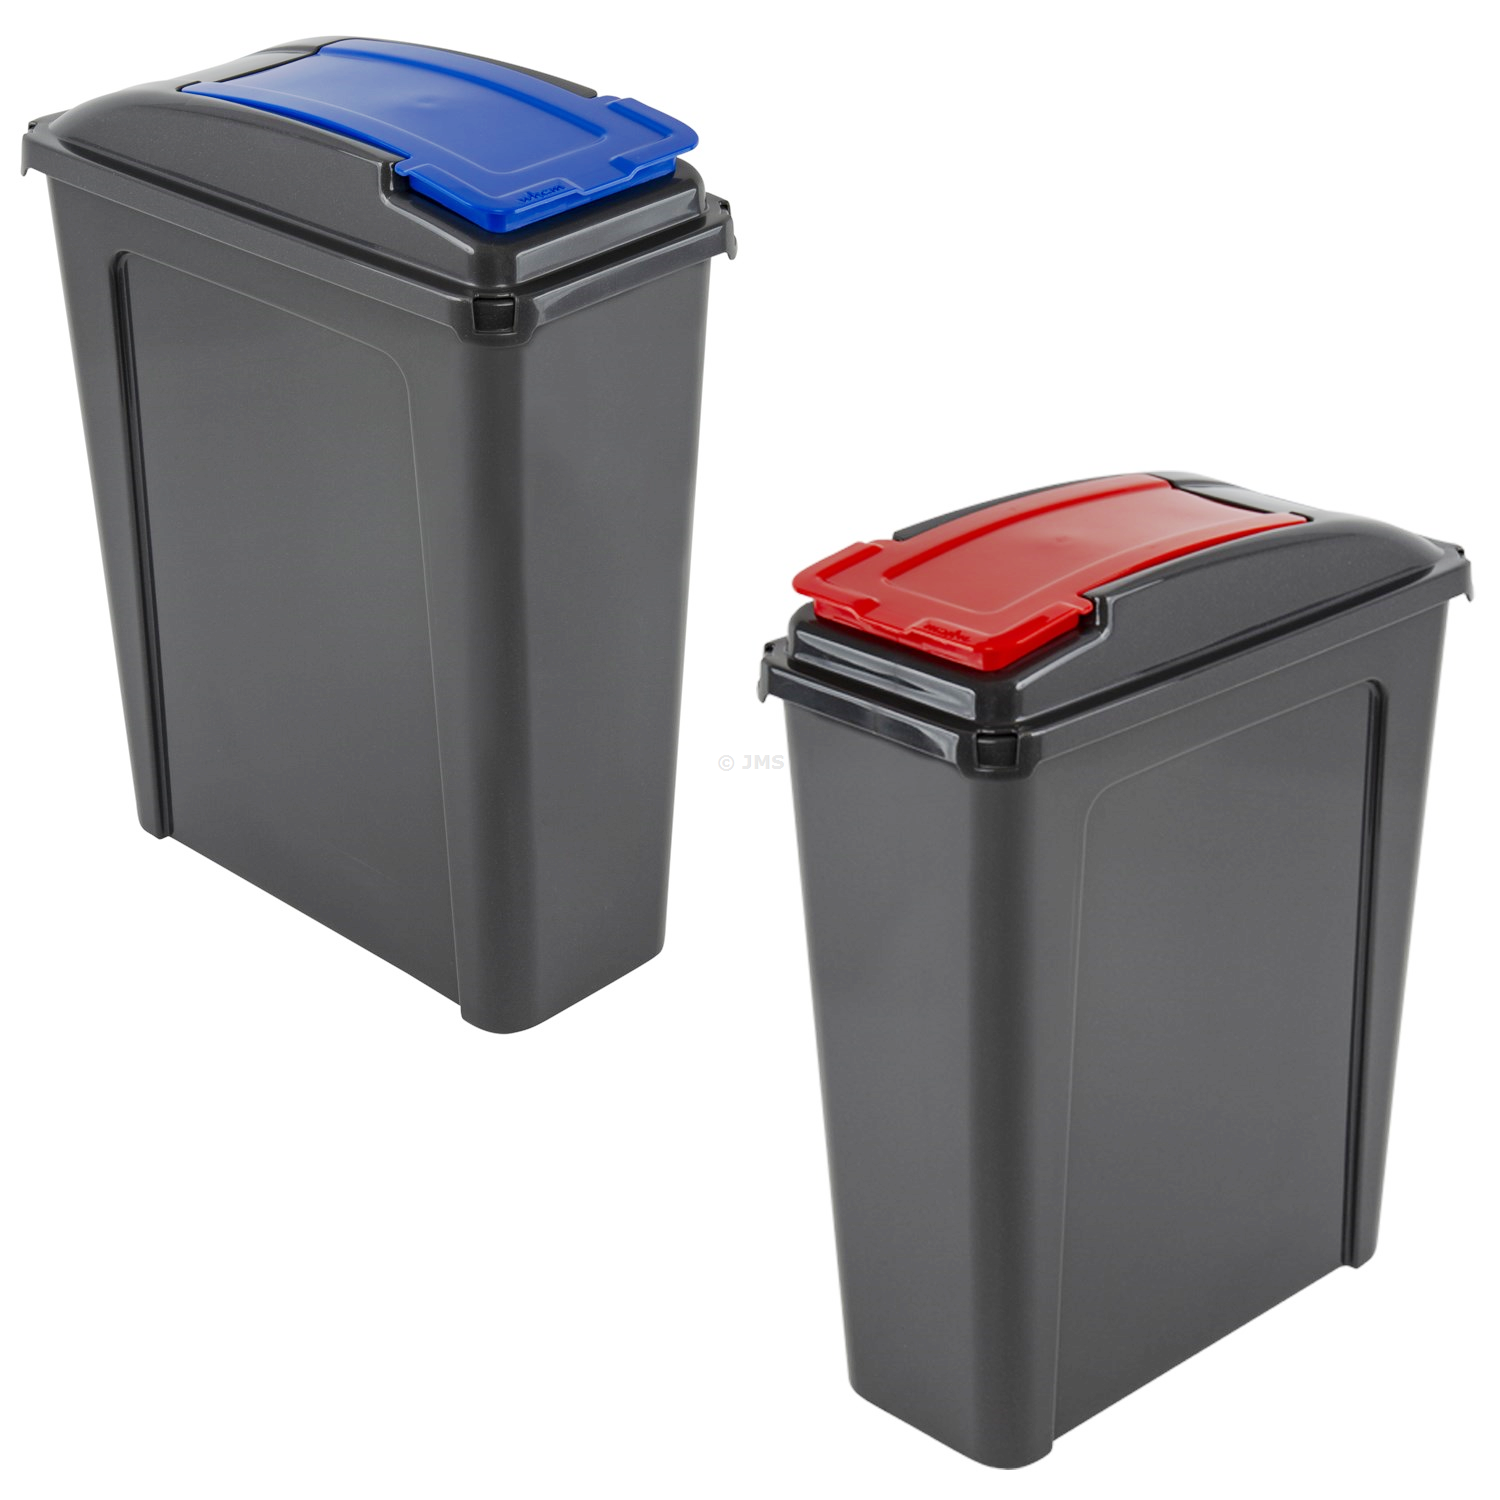 Plastic Recycle It 25L Slimline Bin & Lid RED + BLUE Waste Recycling Dustbin Multi-purpose Storage Container Home Kitchen Garden